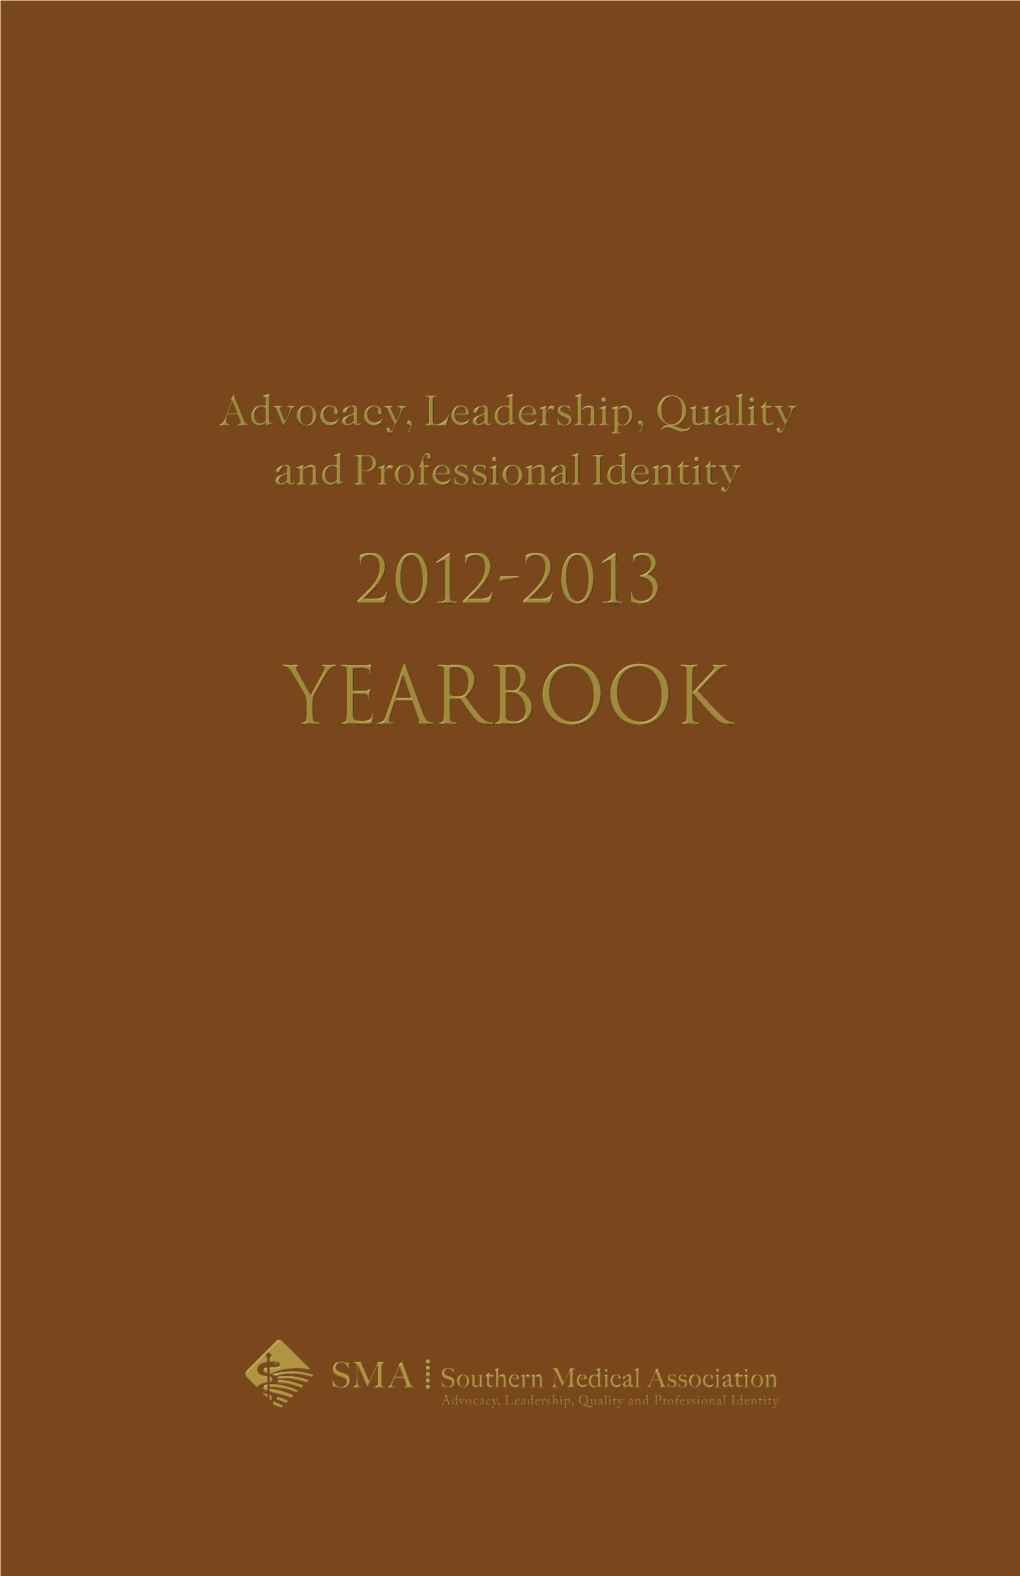 2013-14 Yearbook.Pdf